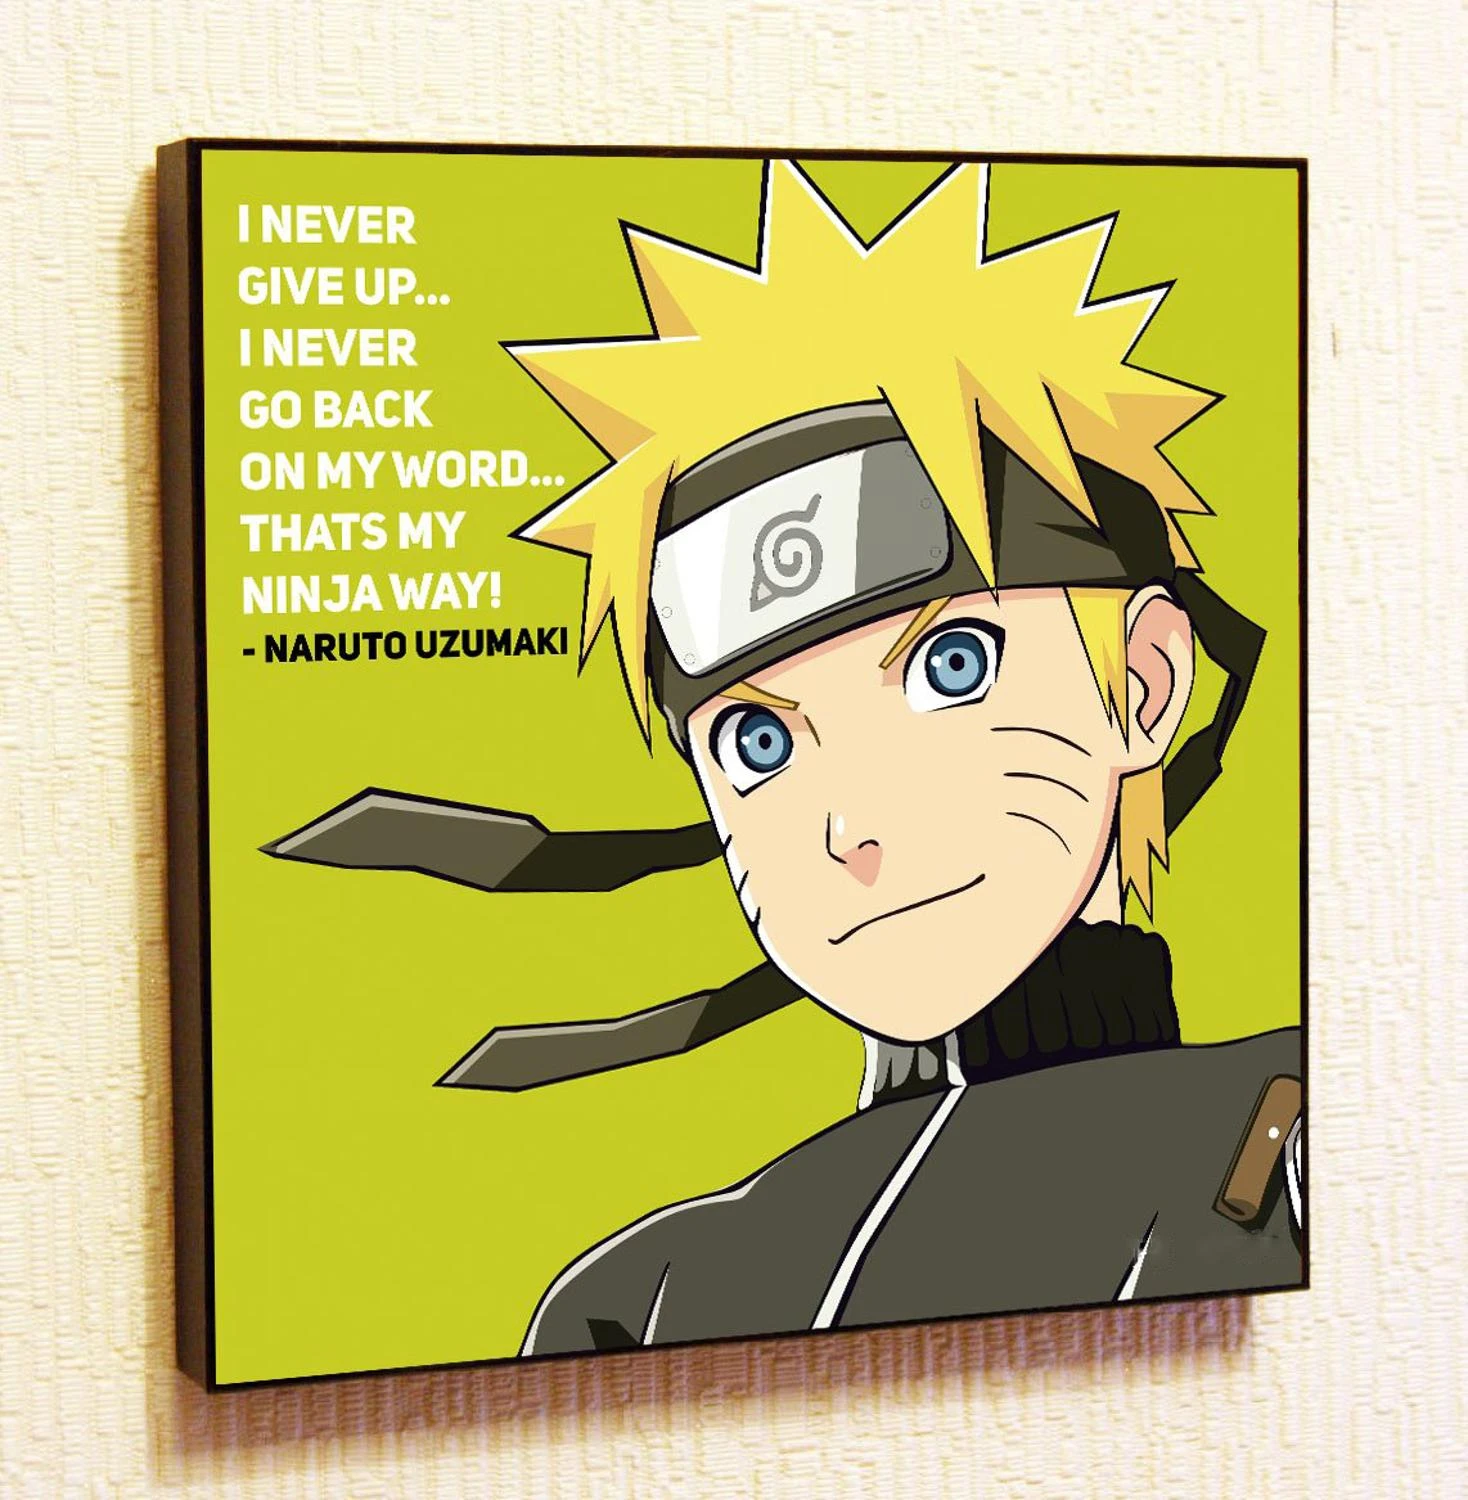 Naruto Uzumaki Japan Anime Motivational Quotes Wall Art Gifts Portrait  Framed Famous Paintings on Canvas Poster Printed Artwork|Painting &  Calligraphy| - AliExpress